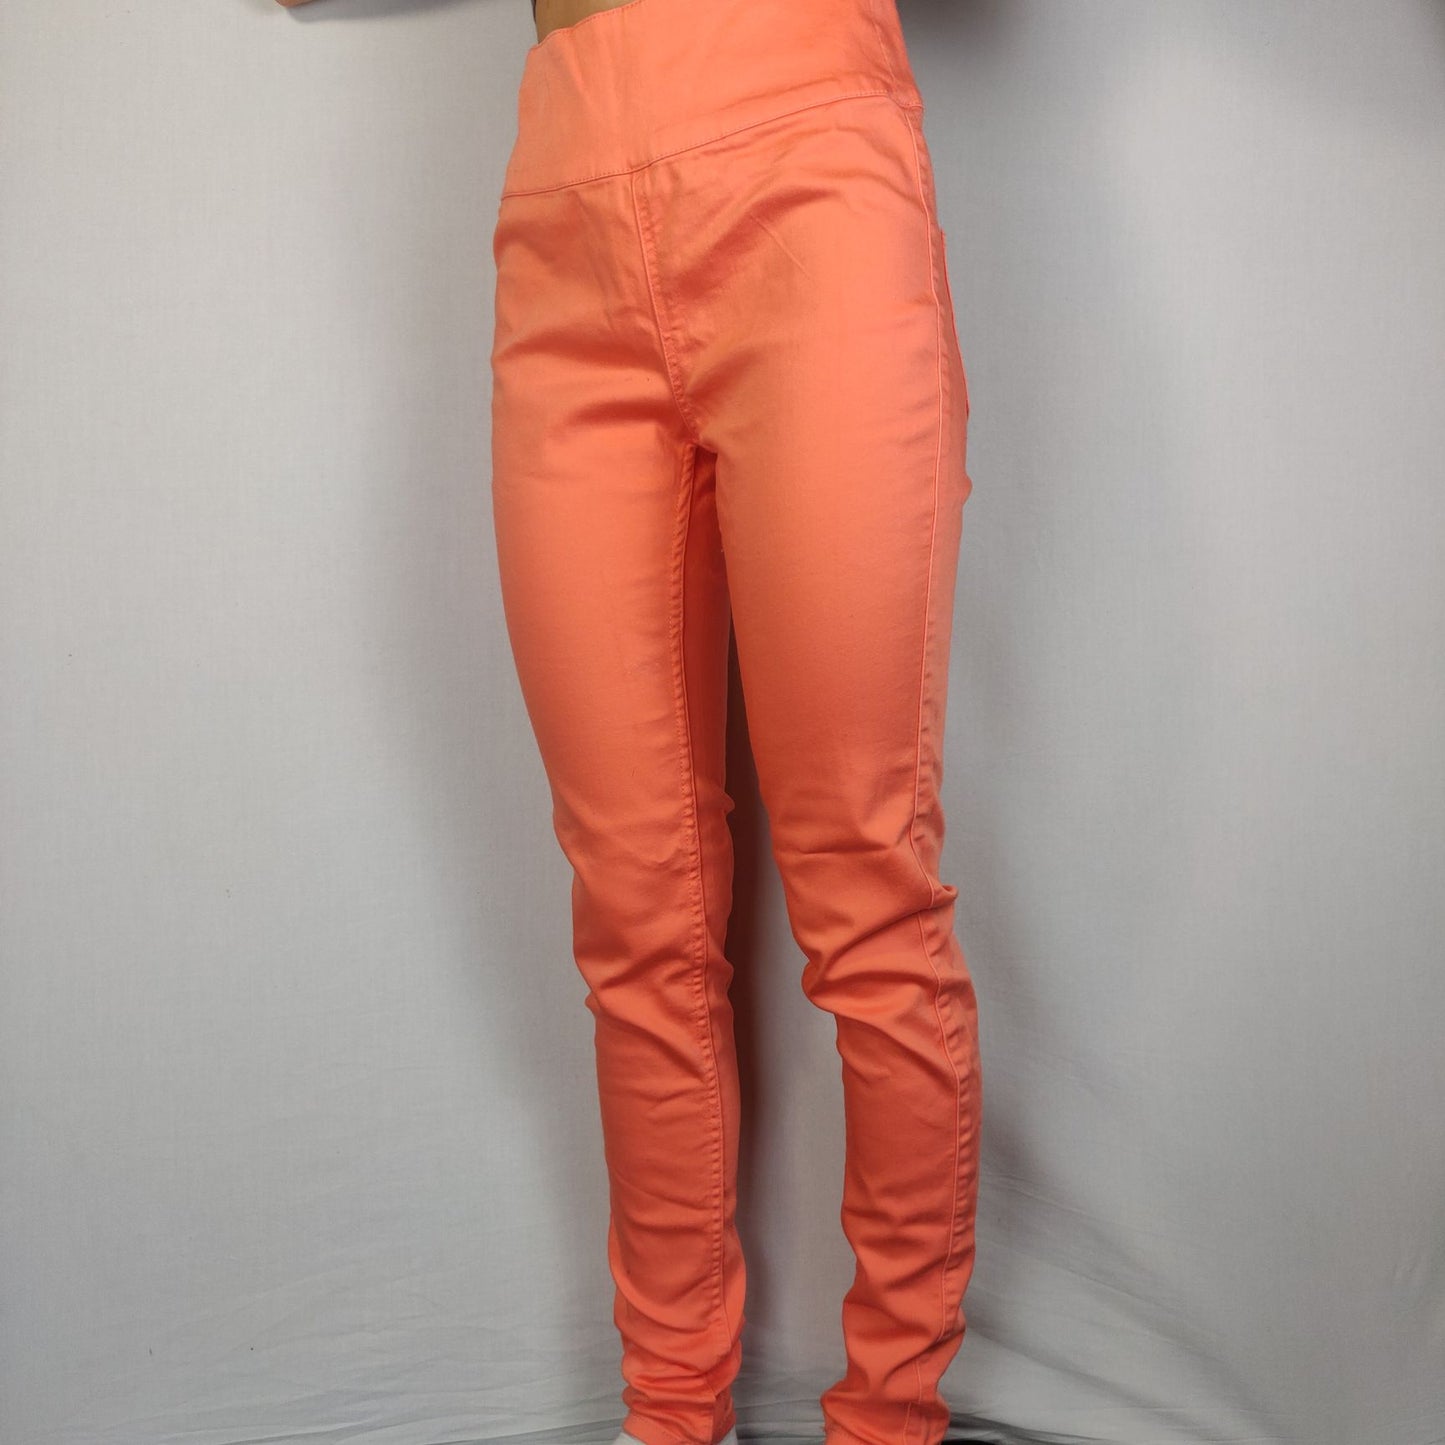 Pieces Coral High Waist Trousers Women Size Medium/Large